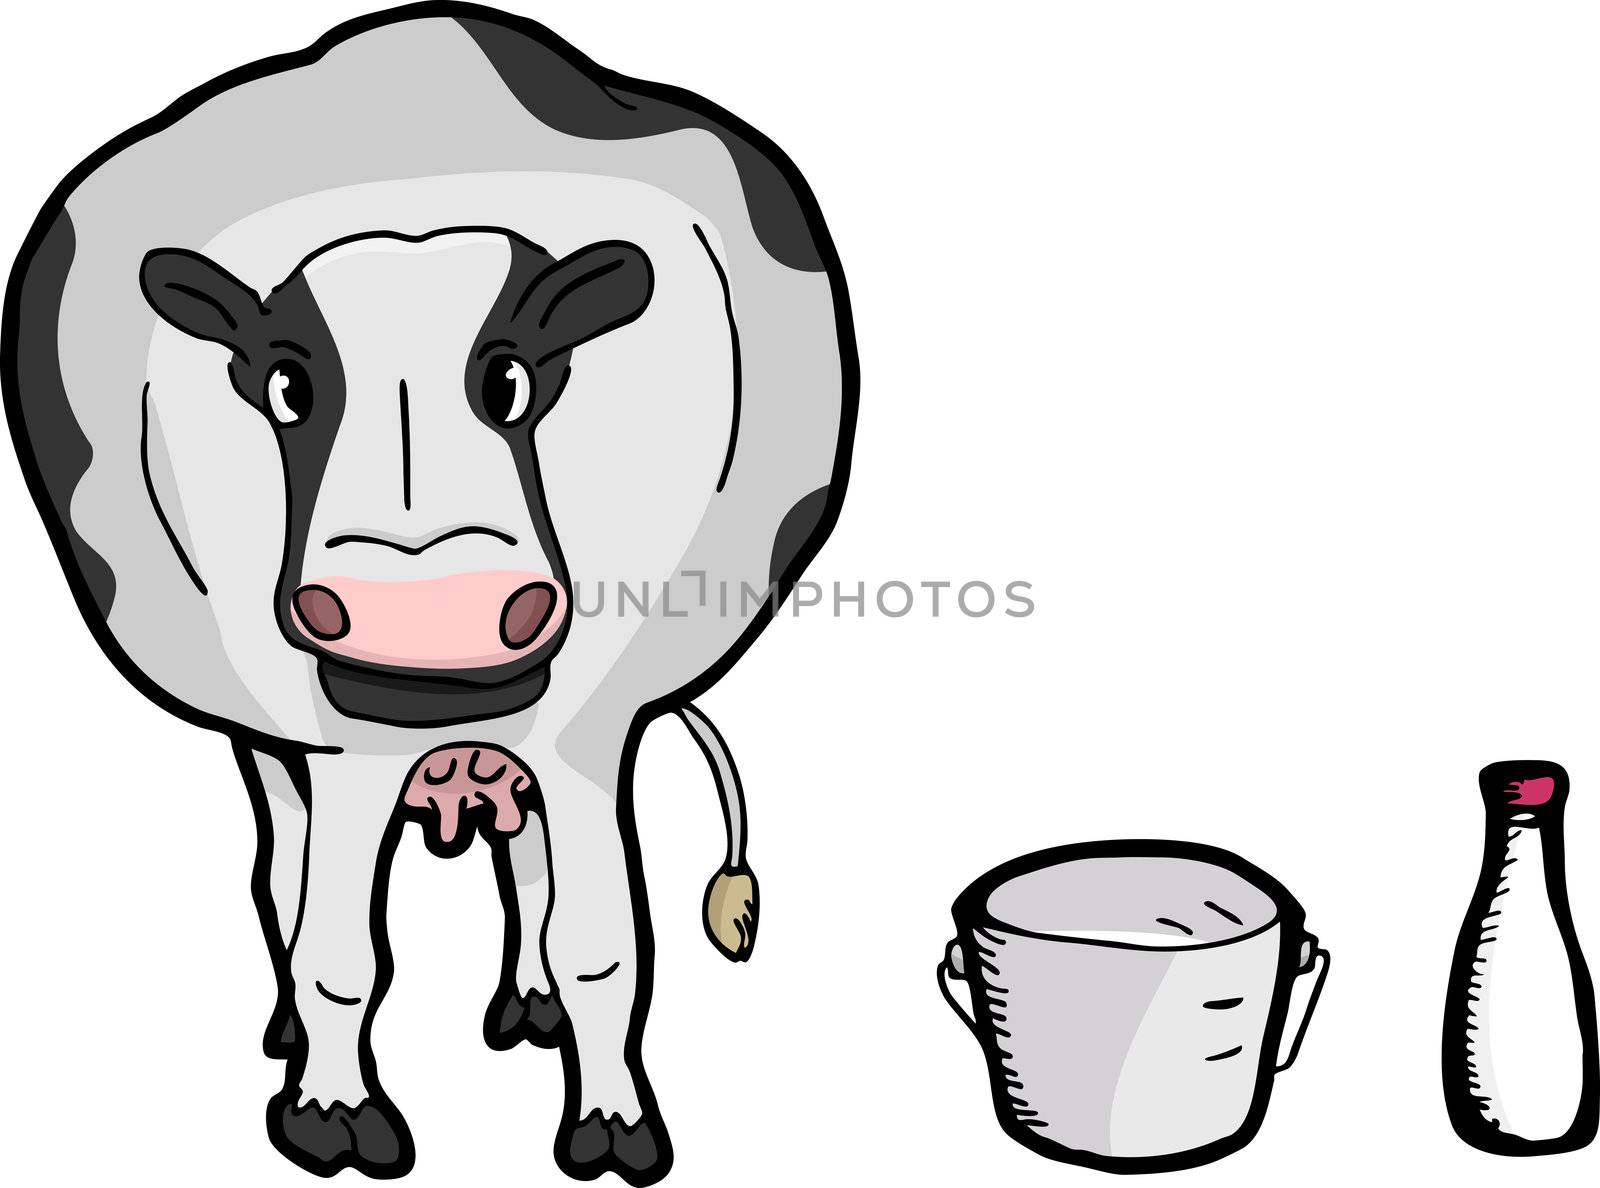 Cute fat dairy cow with pail and bottle of milk